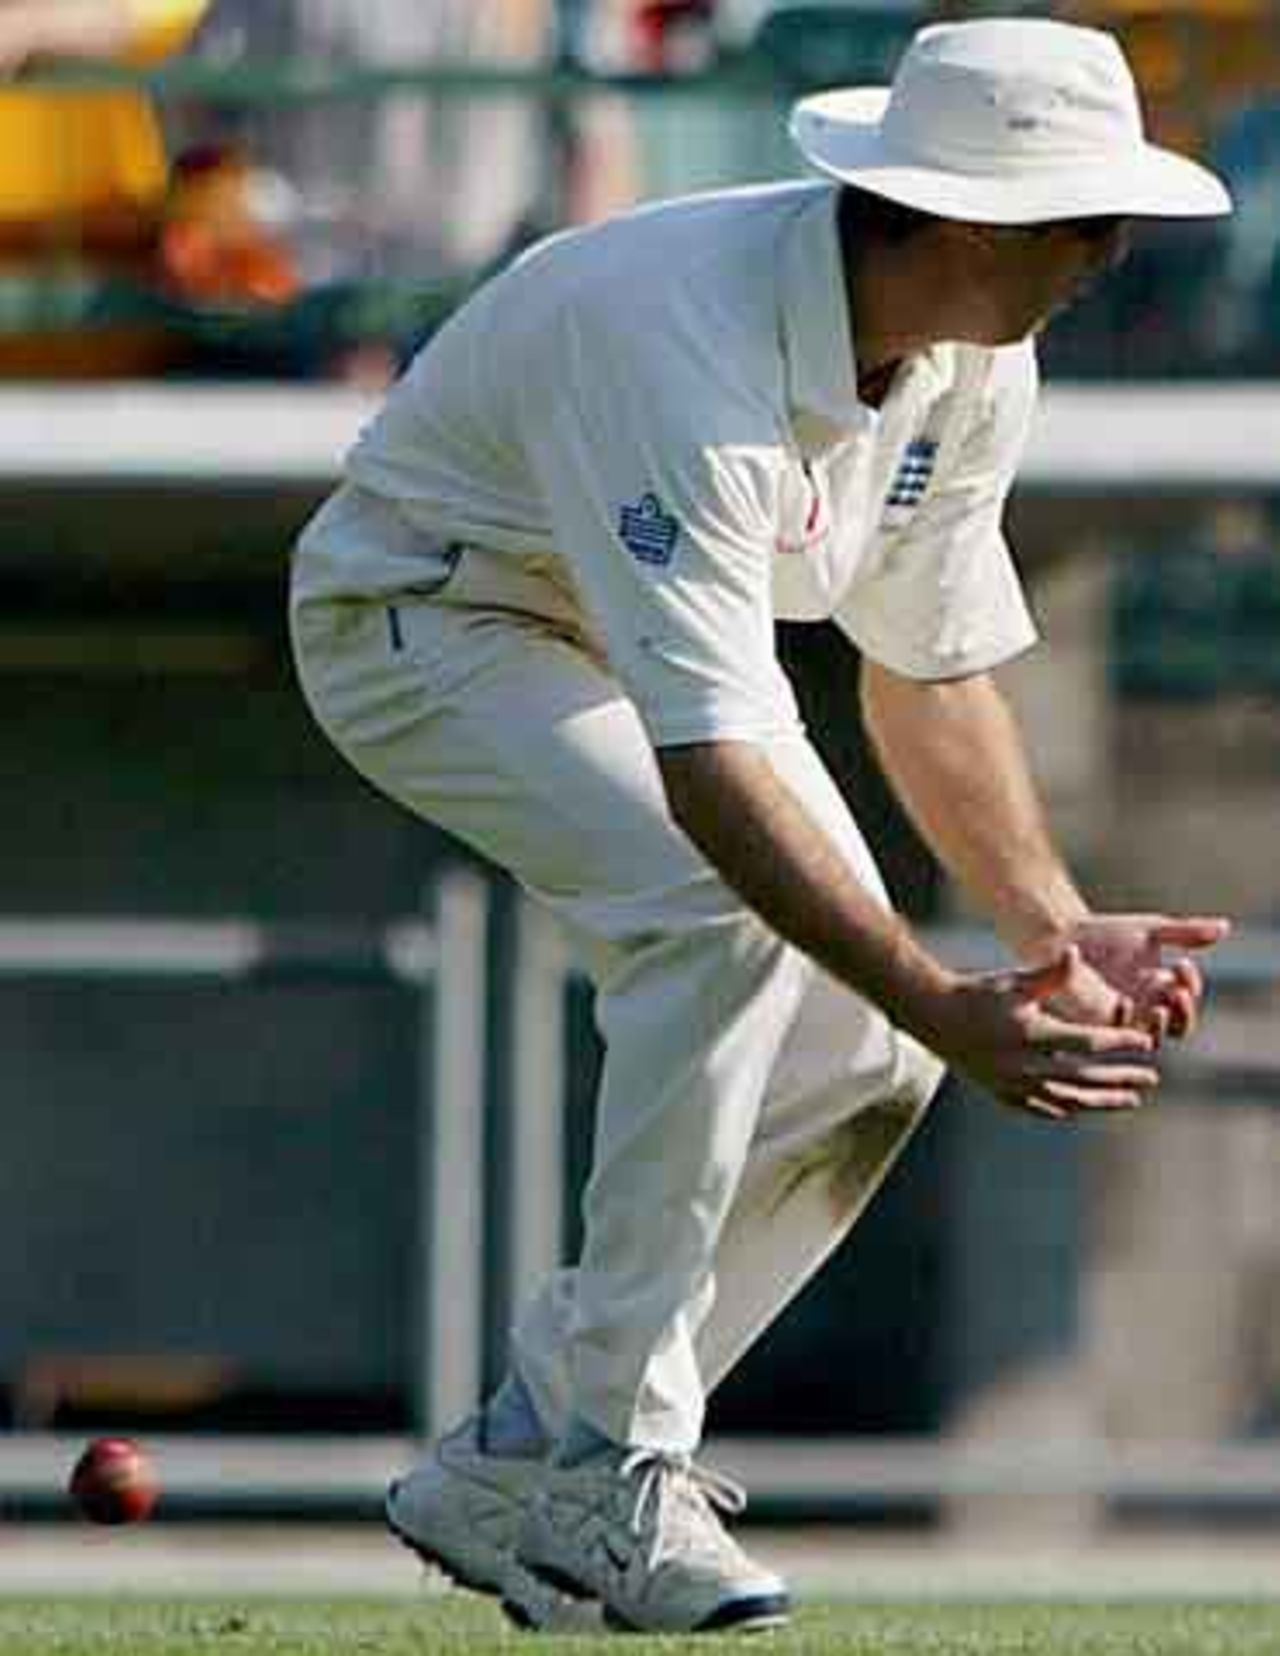 England's Michael Vaughan drops a catch off Australia's Matthew Hayden during the first day's play in the first Ashes test match against England at the Gabba in Brisbane November 7, 2002.